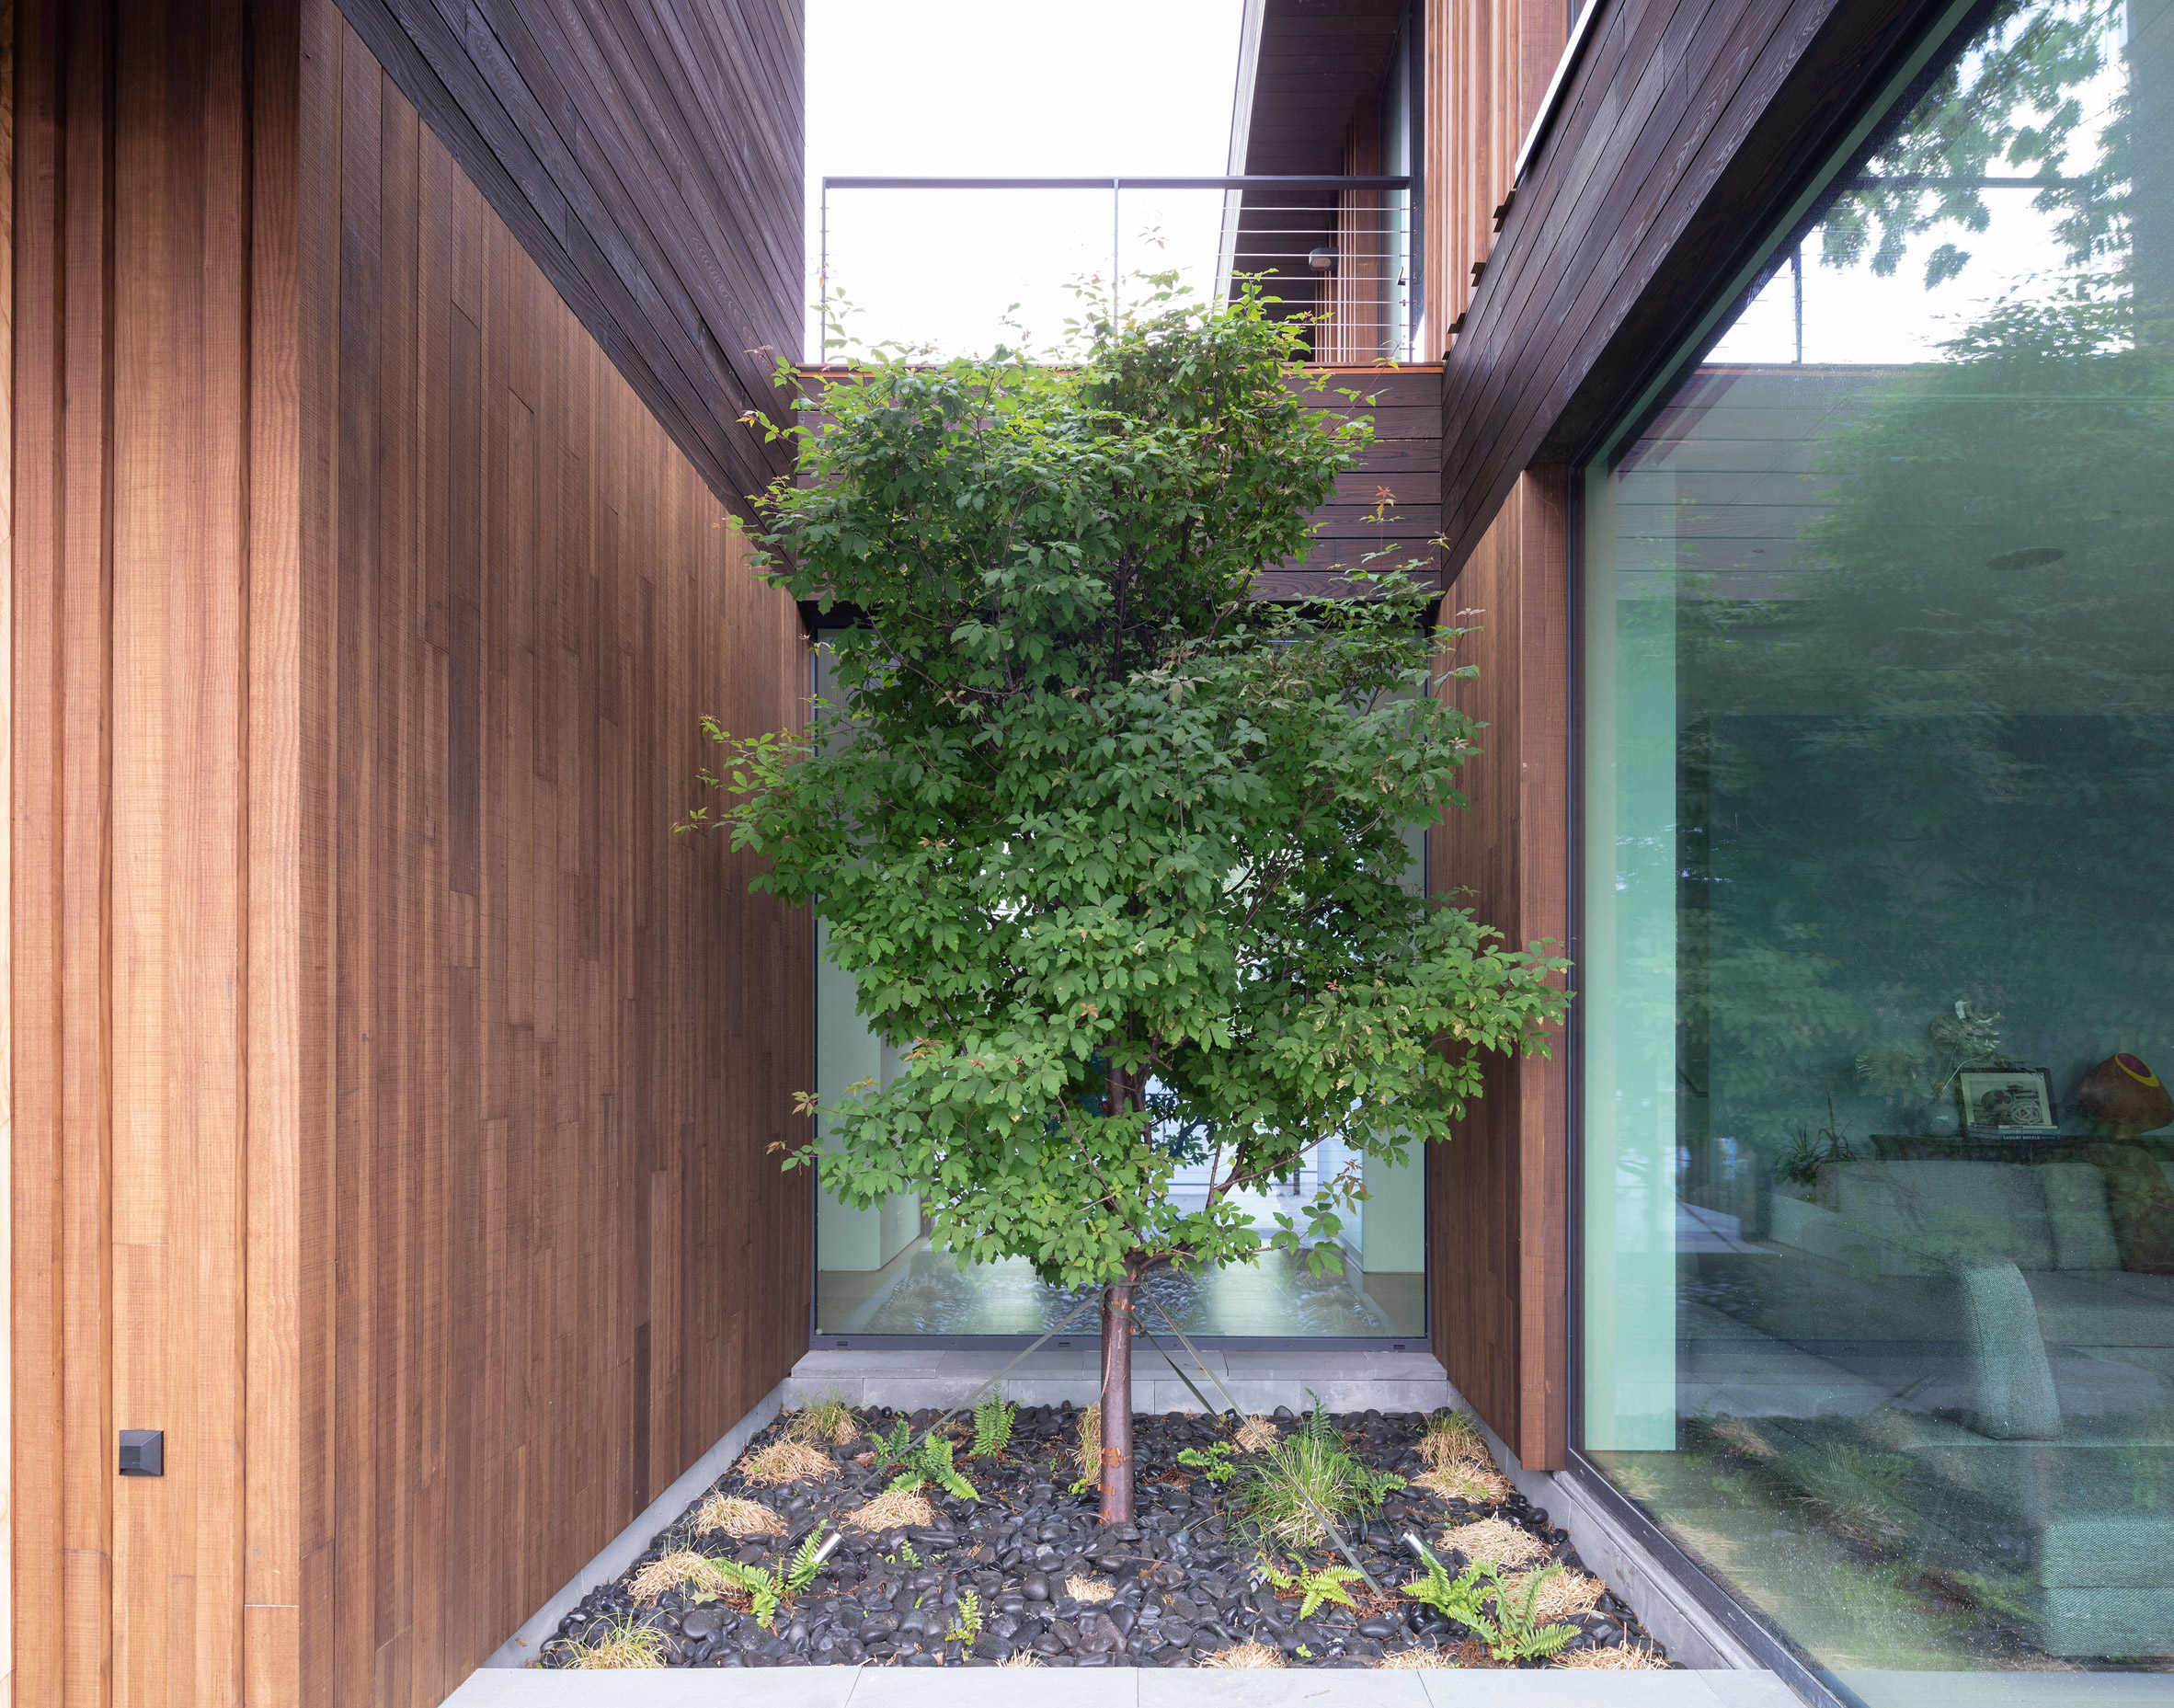 A maple tree in a small courtyard between a glazed and timber-glad sides of a house